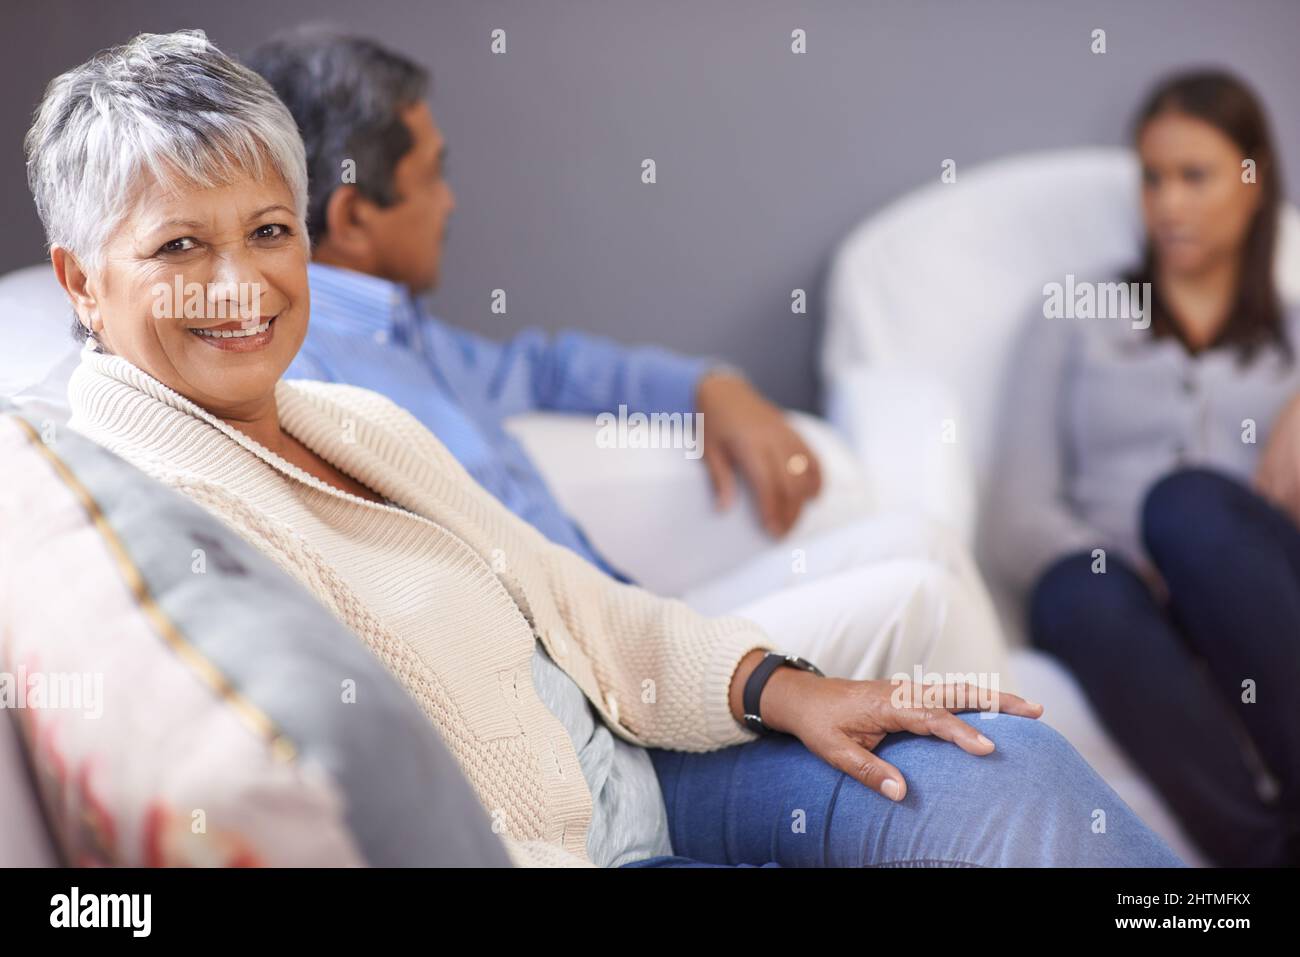 I have the perfect family. Portrait of a senior woman sitting with her husband and adult daughter at home. Stock Photo